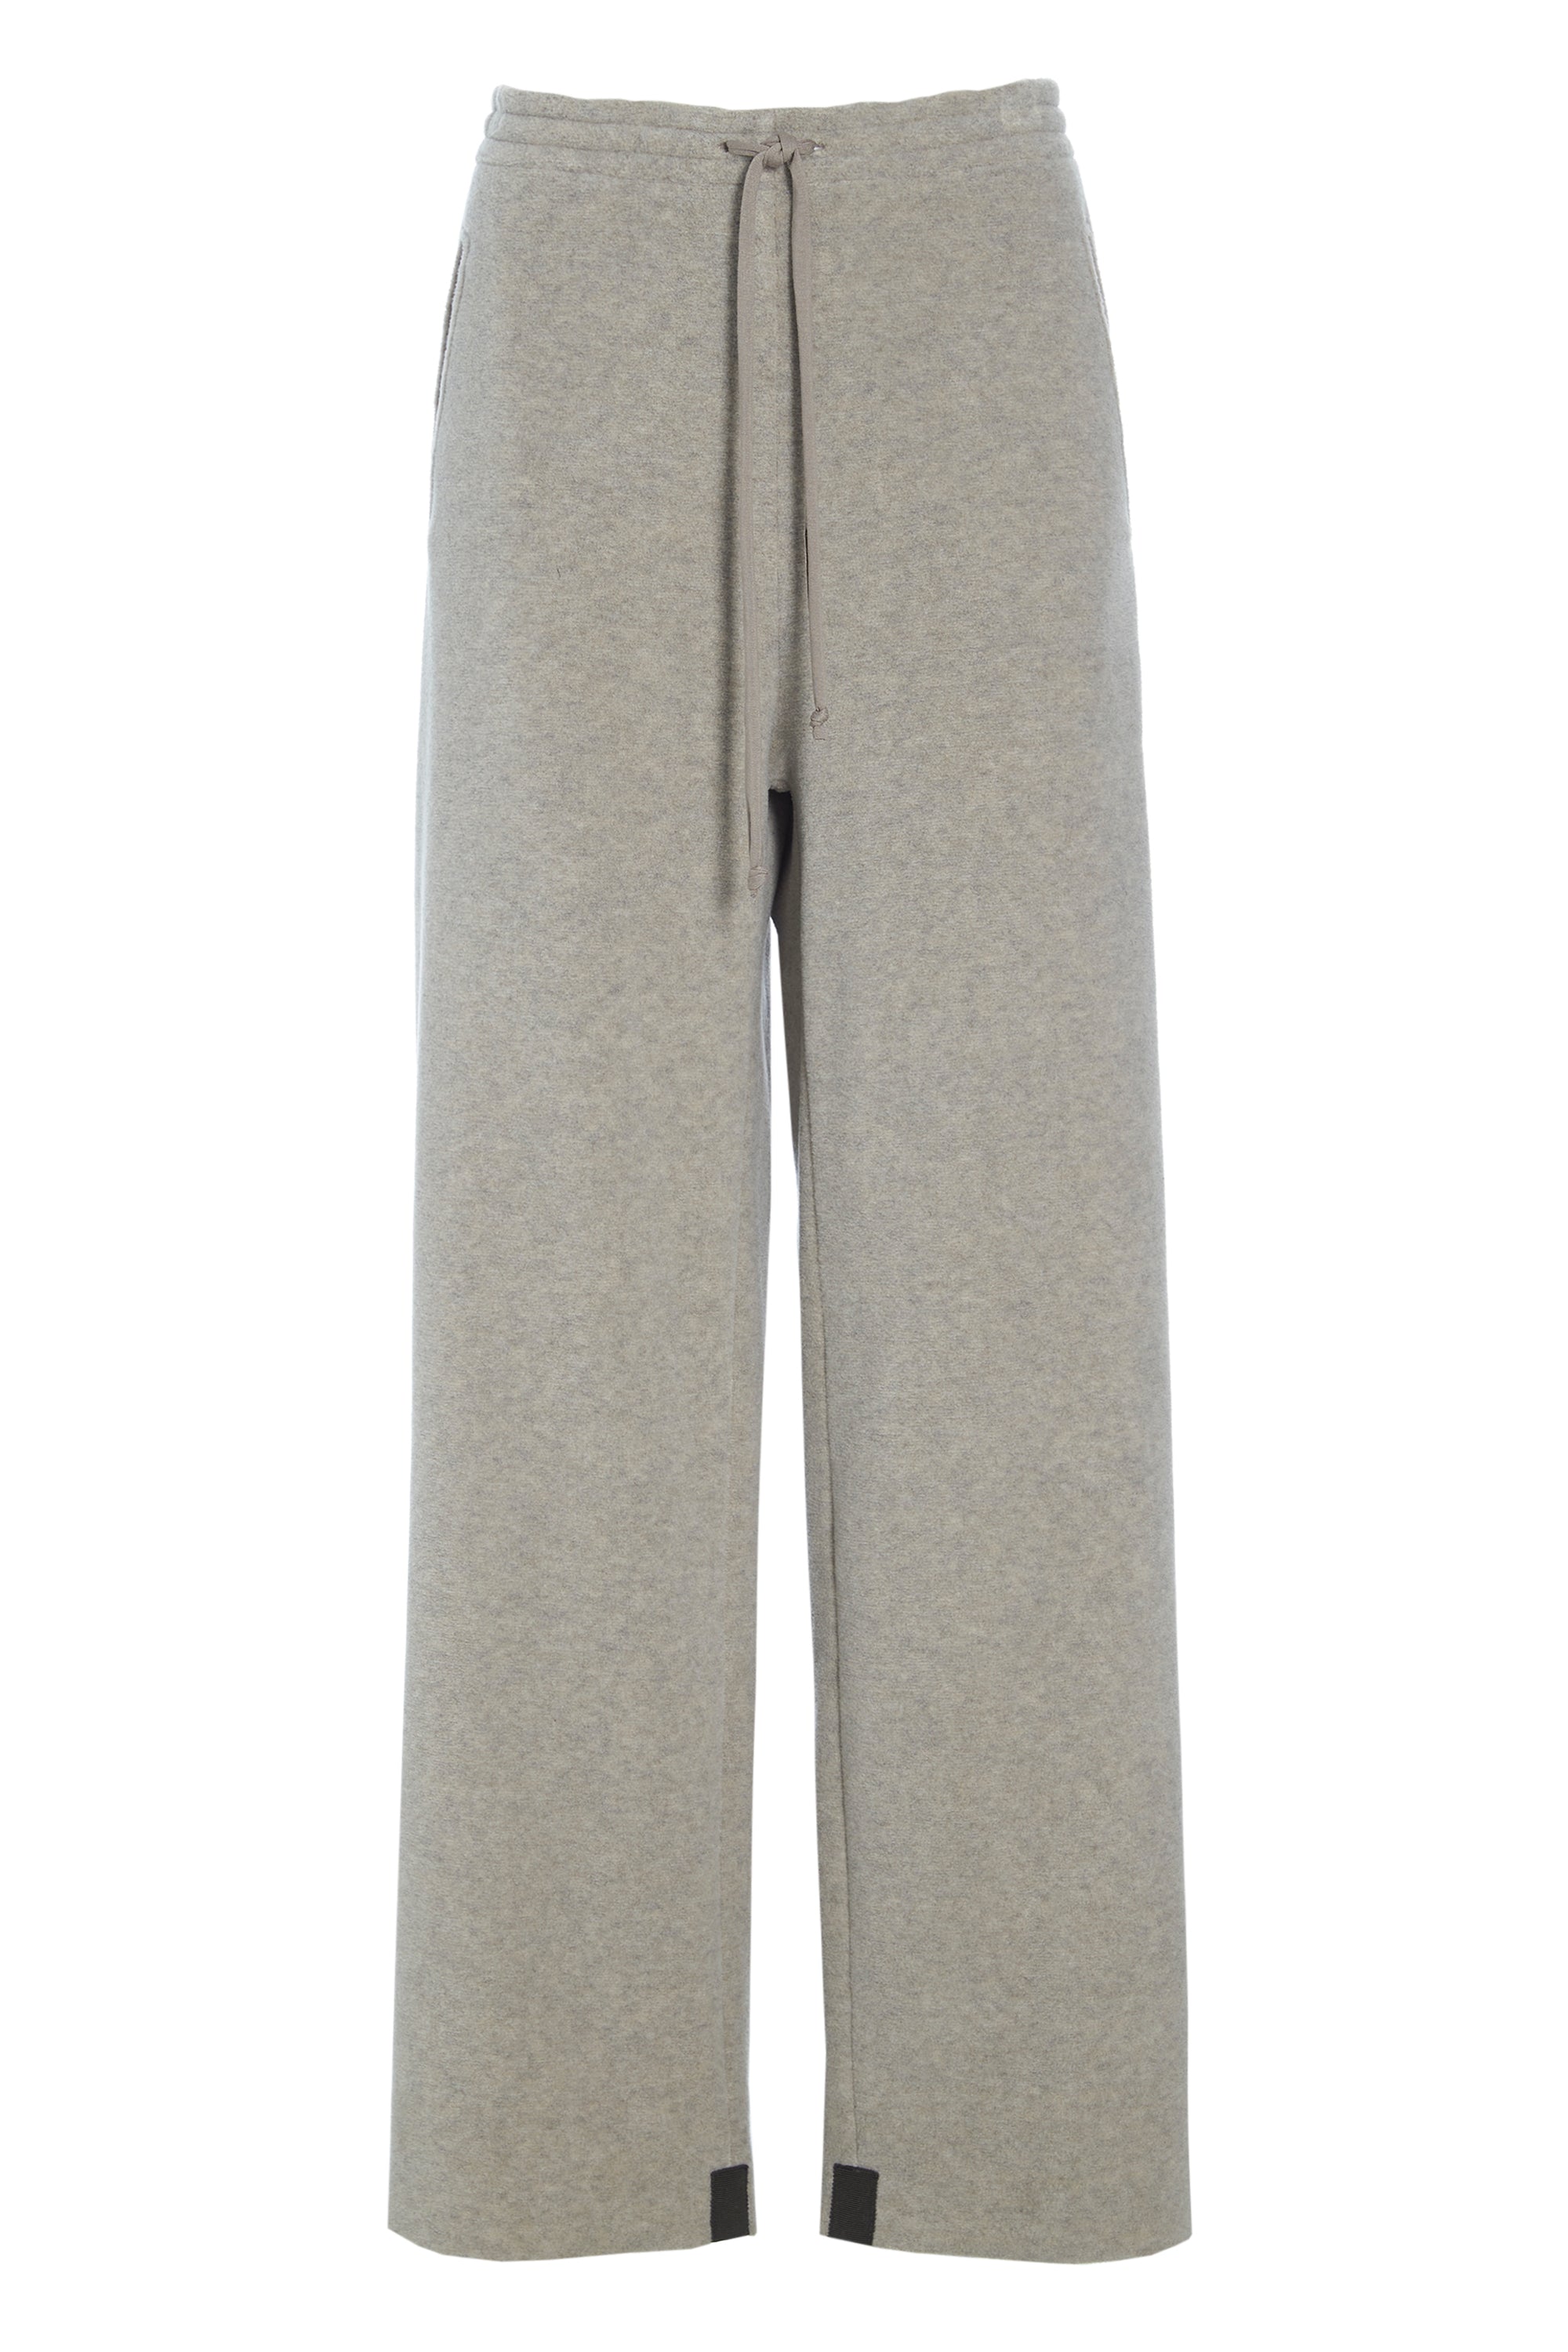 Men's Midweight Fleece Pant | Independent Trading Co. - Independent Trading  Company